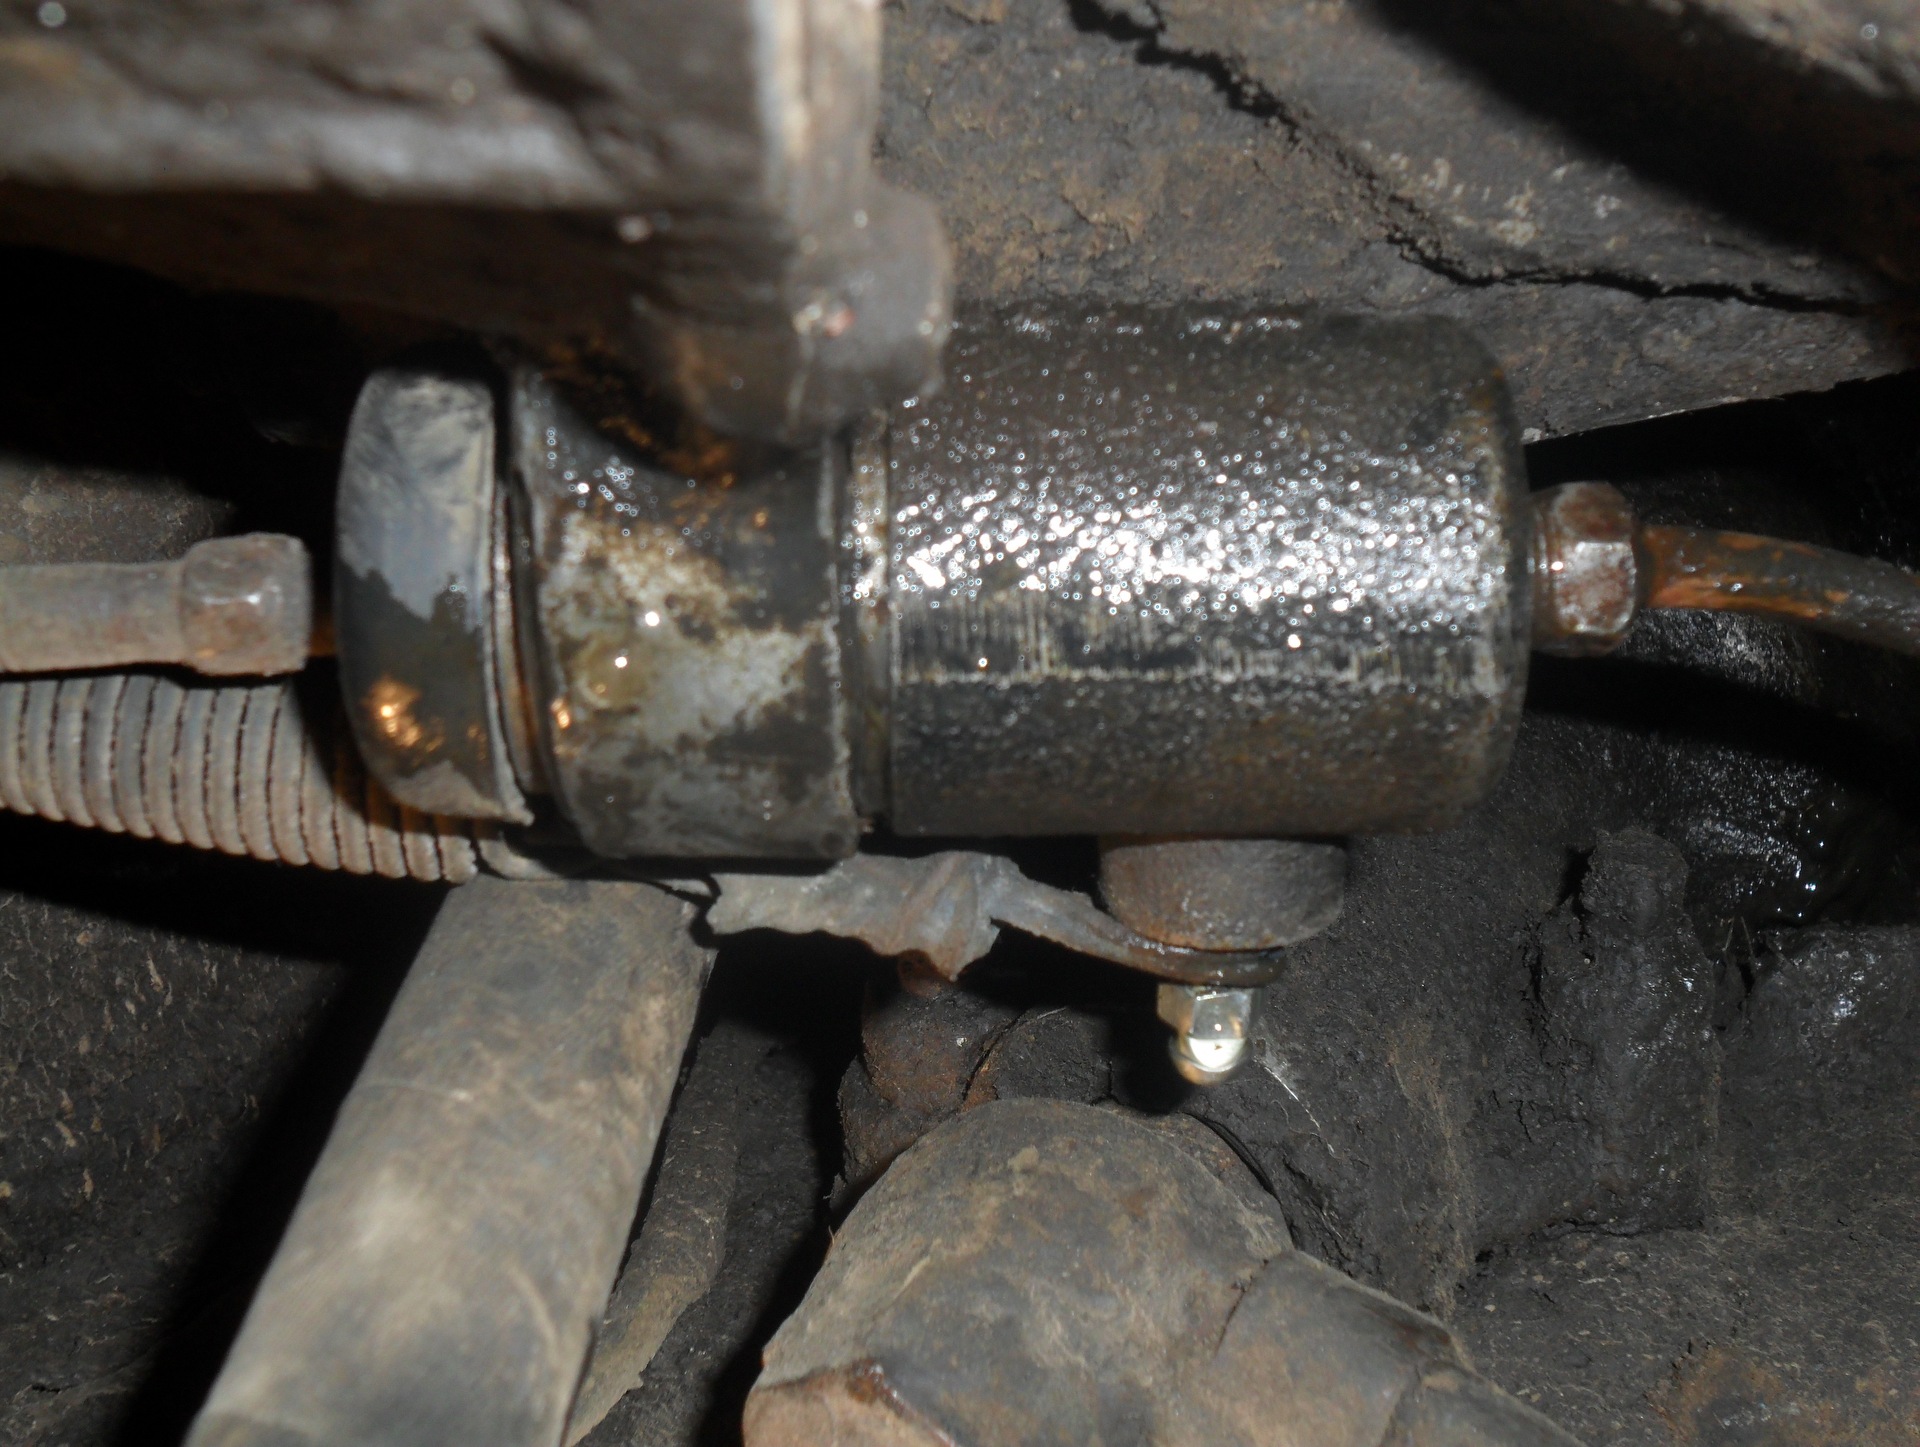 Faults in the clutch master cylinder